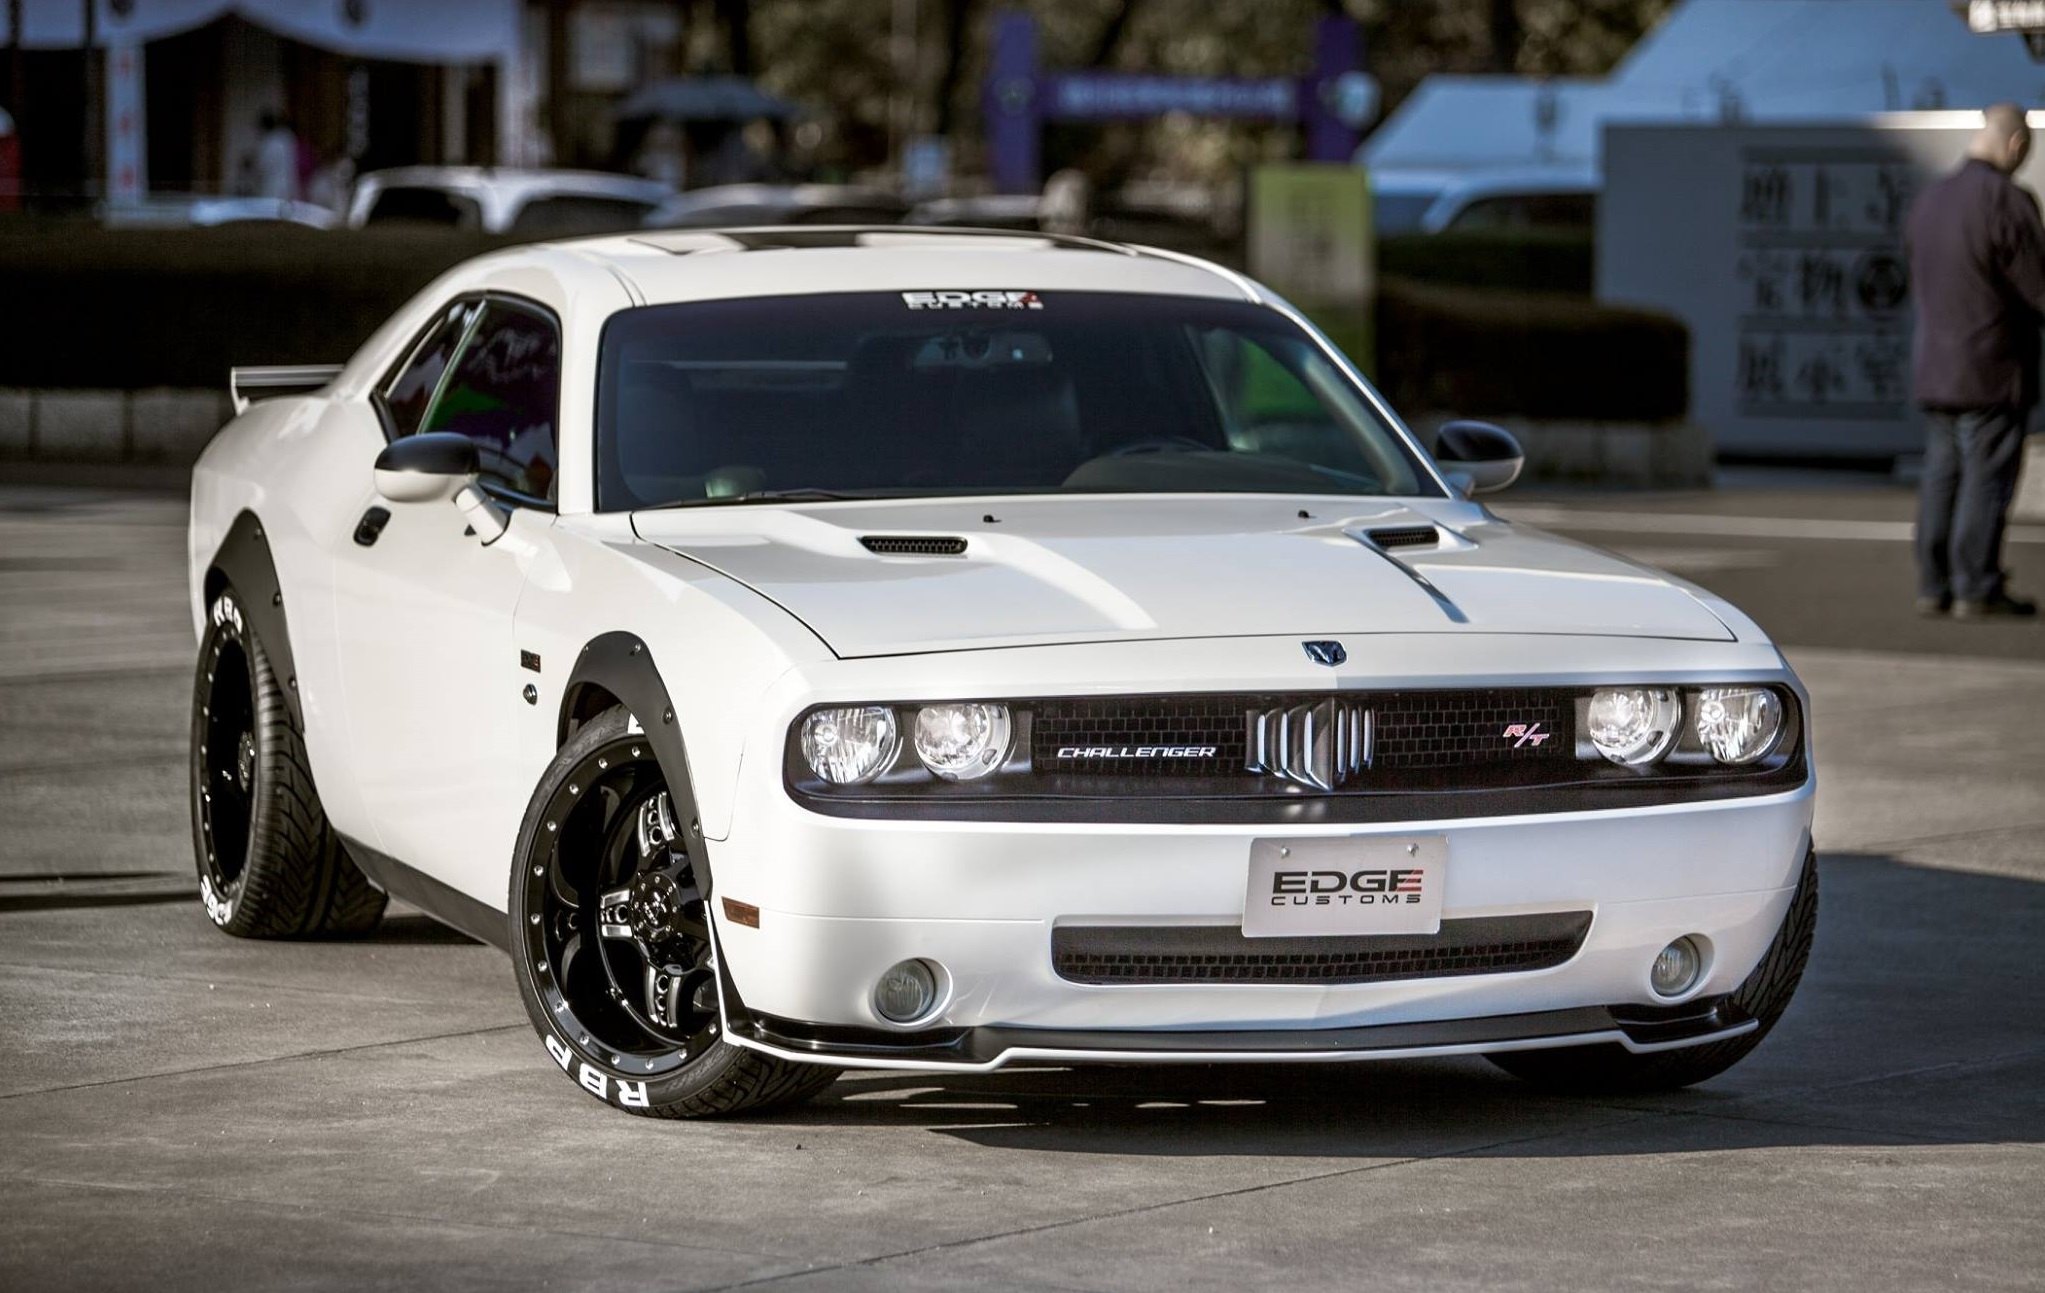 Unique Dodge Challenger With Wide Truck Wheels and Fender Flares - Photo by Edge Customs